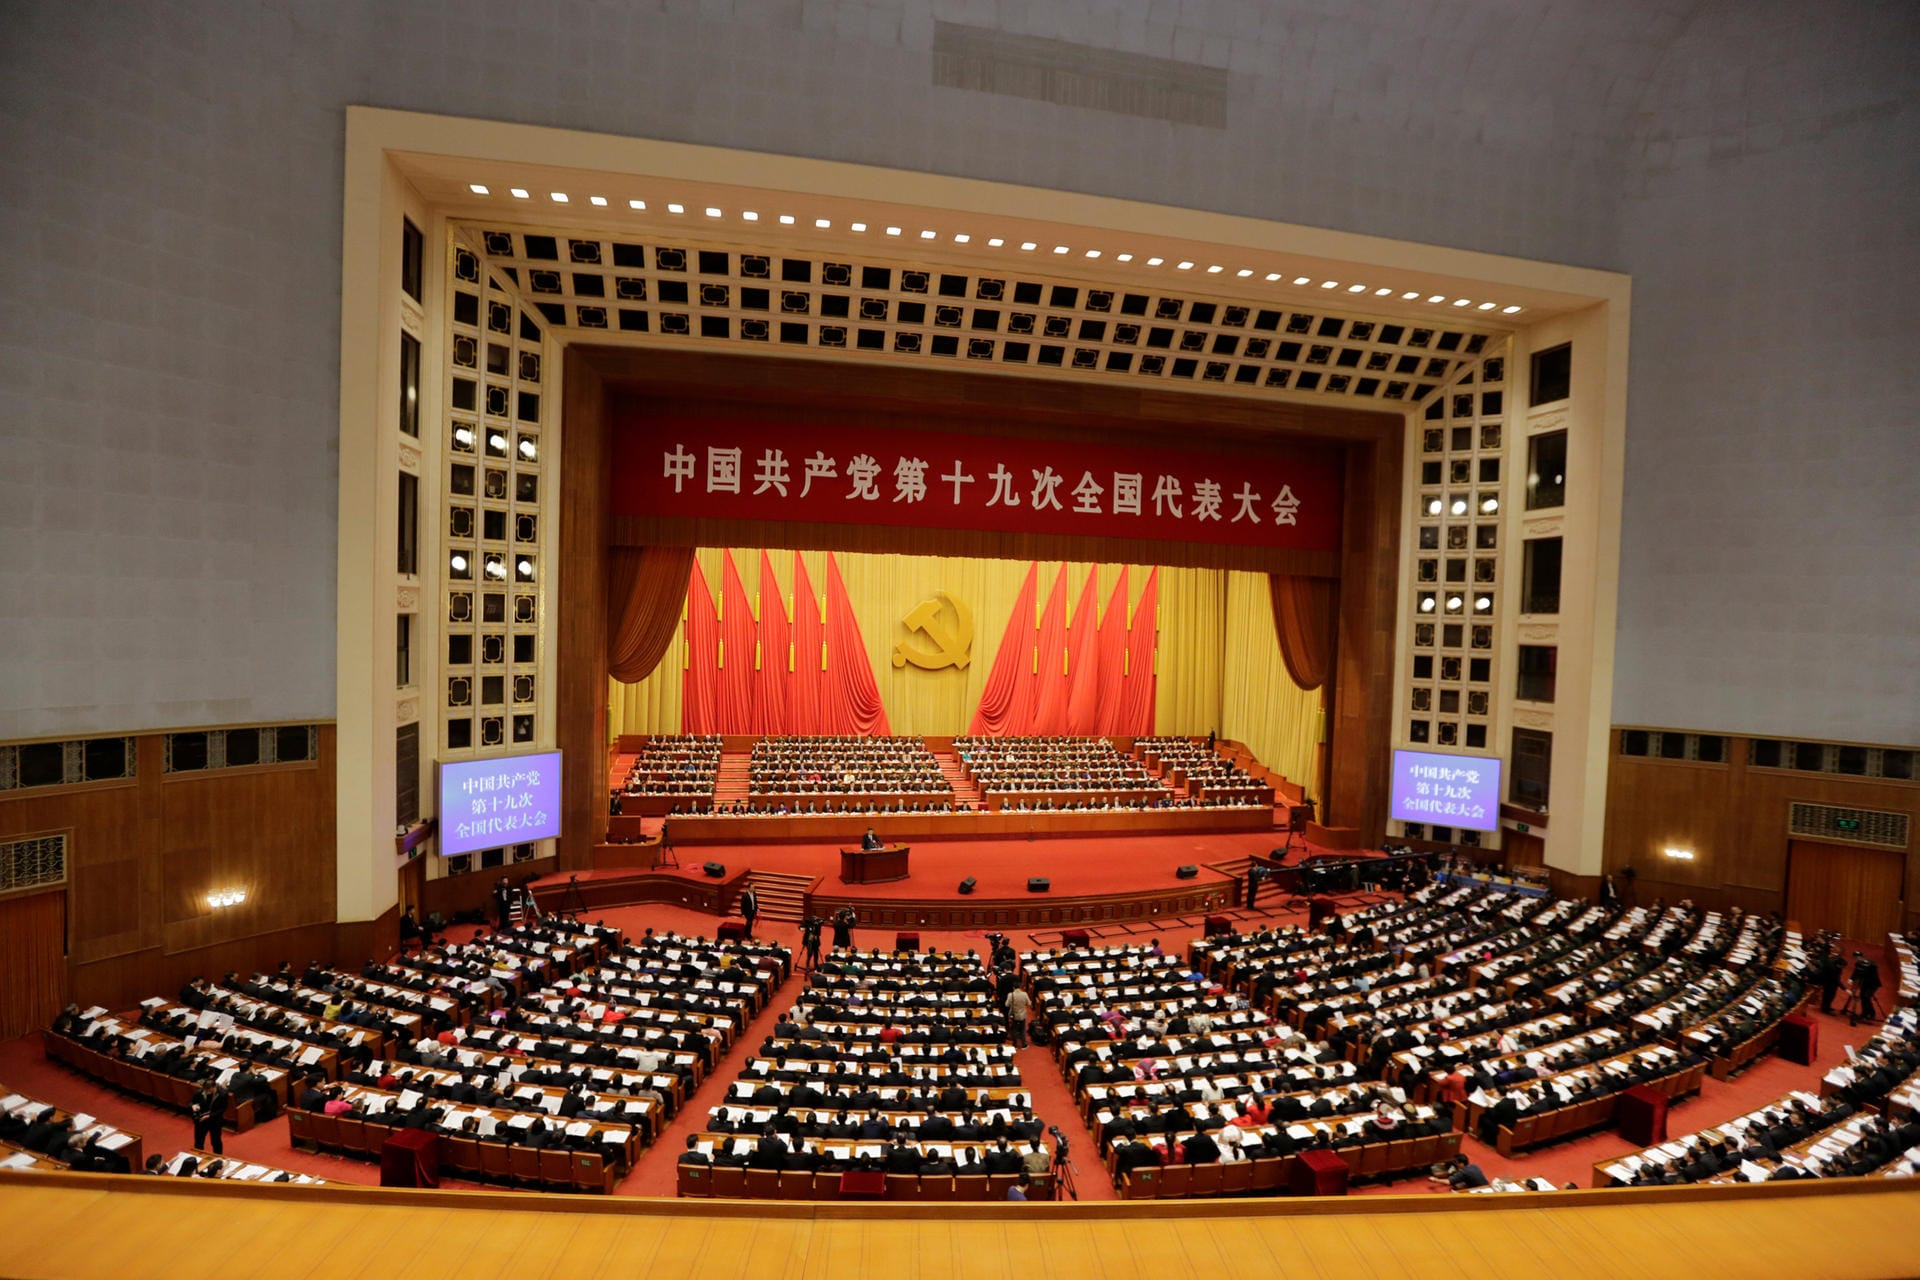 A general view shows delegates attending the opening of the 19th National Congress of the Communist Party of China at the Great Hall of the People in Beijing